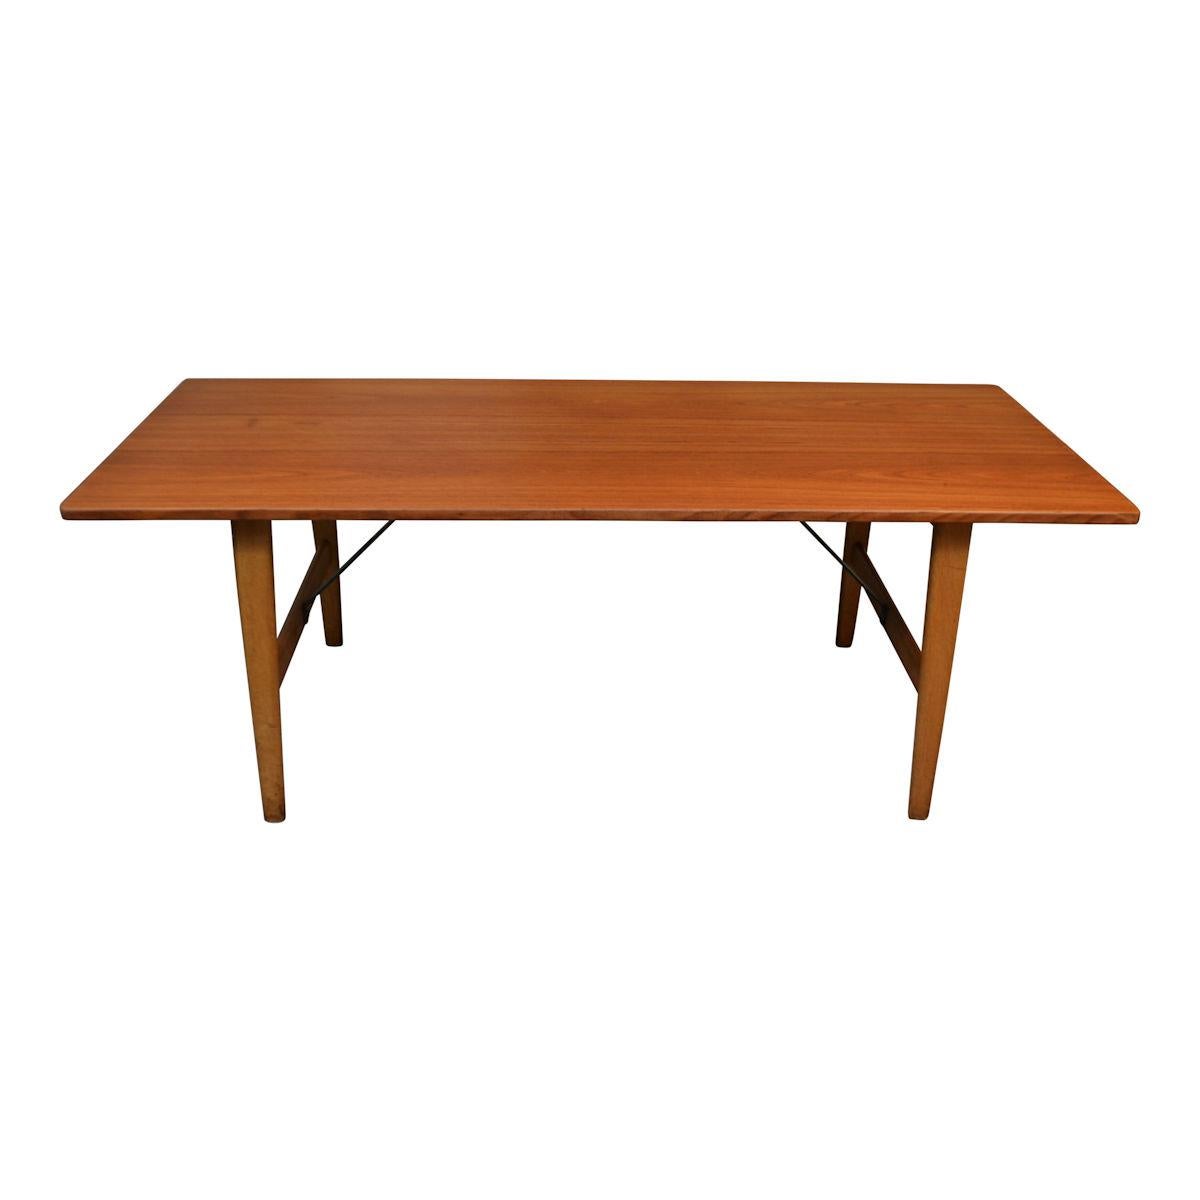 Rare vintage Danish teak dining table, model 281 designed by Børge Mogensen for Fredericia. This rare table features a gorgeous combination of materials. A teak top and a solid oak and metal base. The table is 180 cm in length and 65 cm in height.